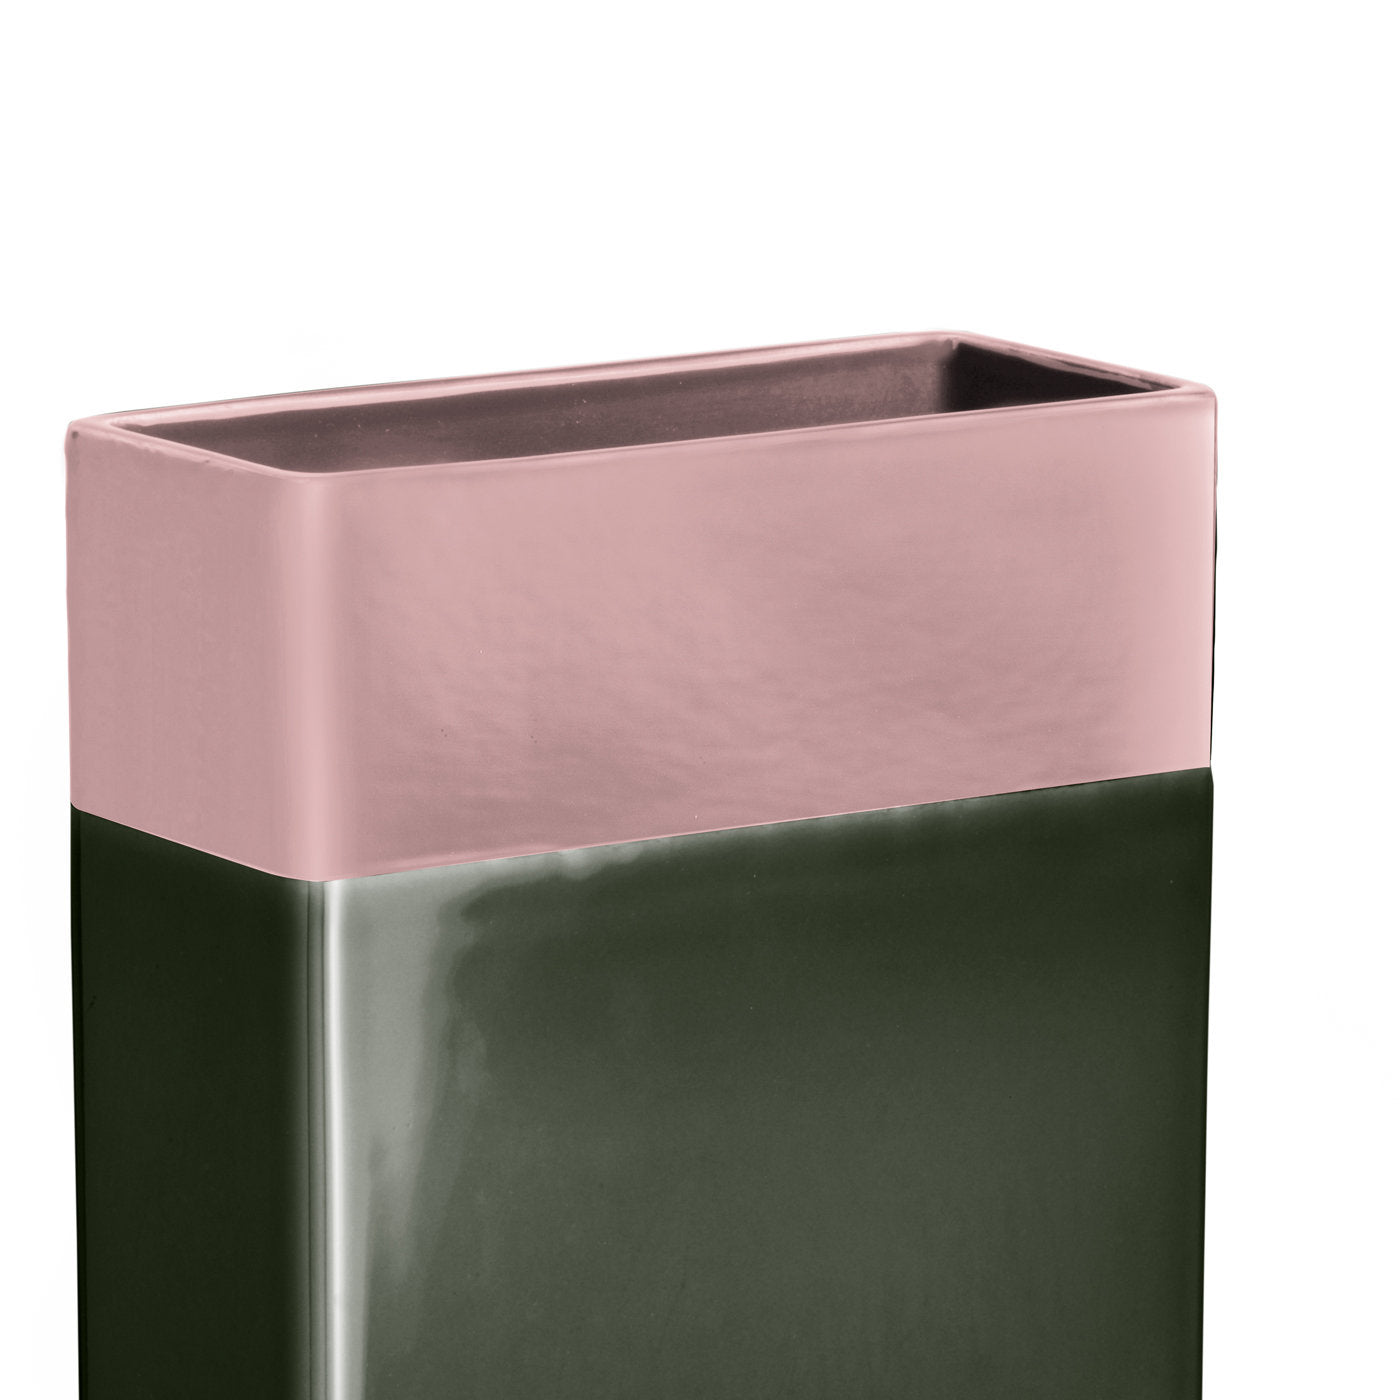 Tall Pink and Green Vase by Dimorestudio - Alternative view 1